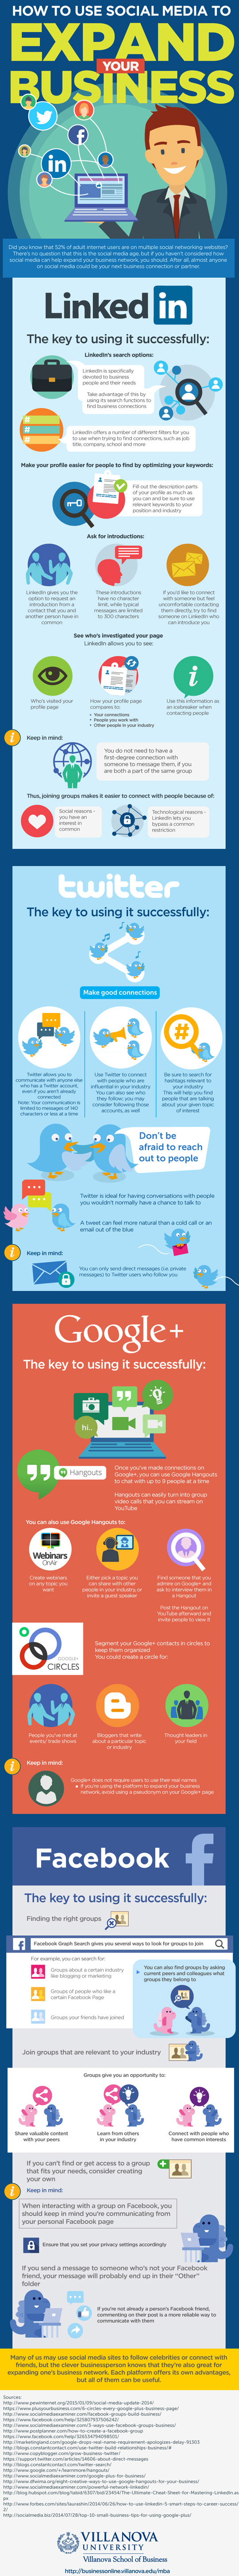 Social Media Mapping Infographic